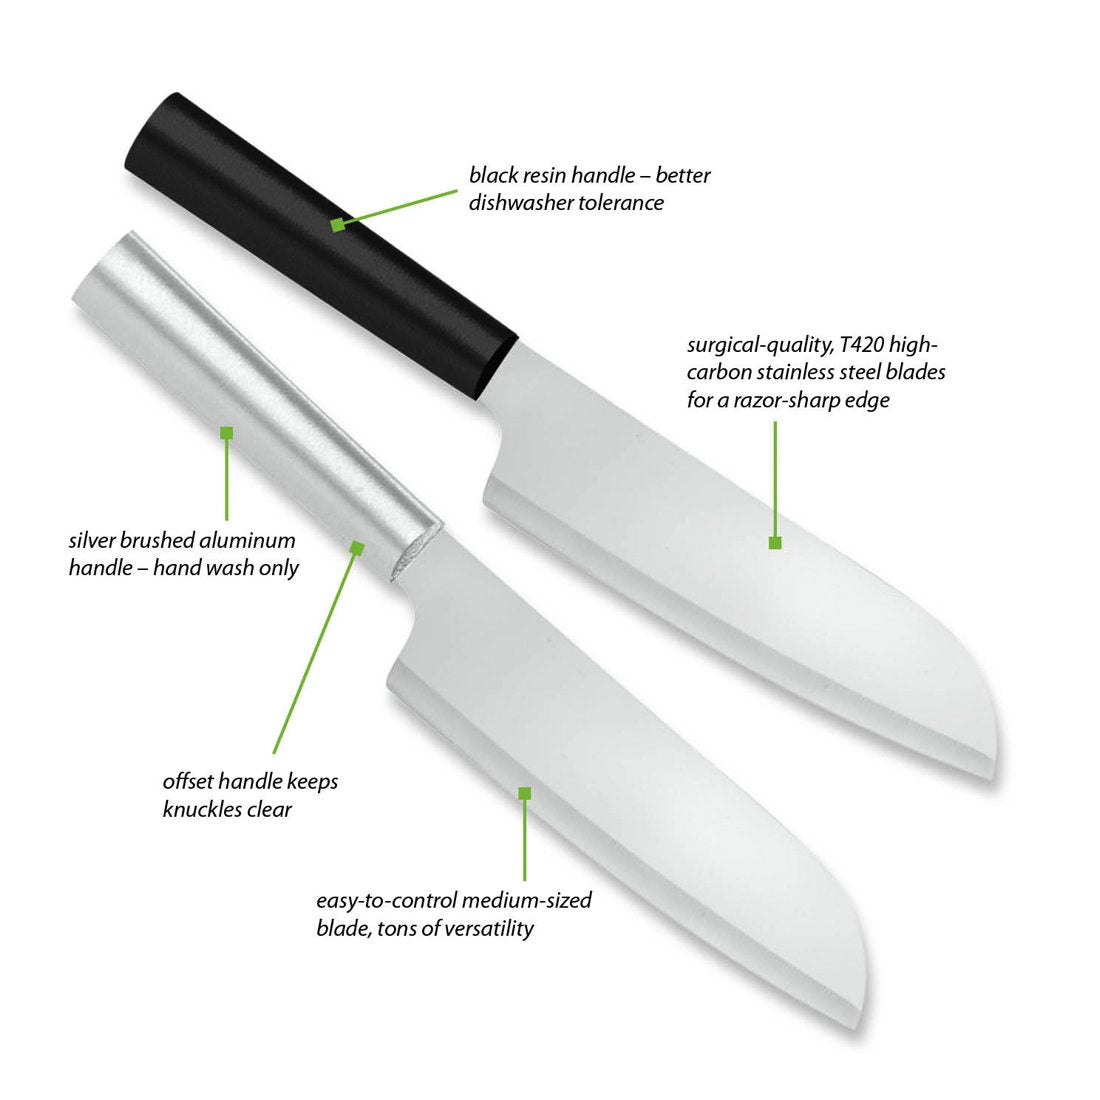 https://cdn.shopify.com/s/files/1/1842/3947/files/cooks-knife-features-simple.jpg?v=1628093434